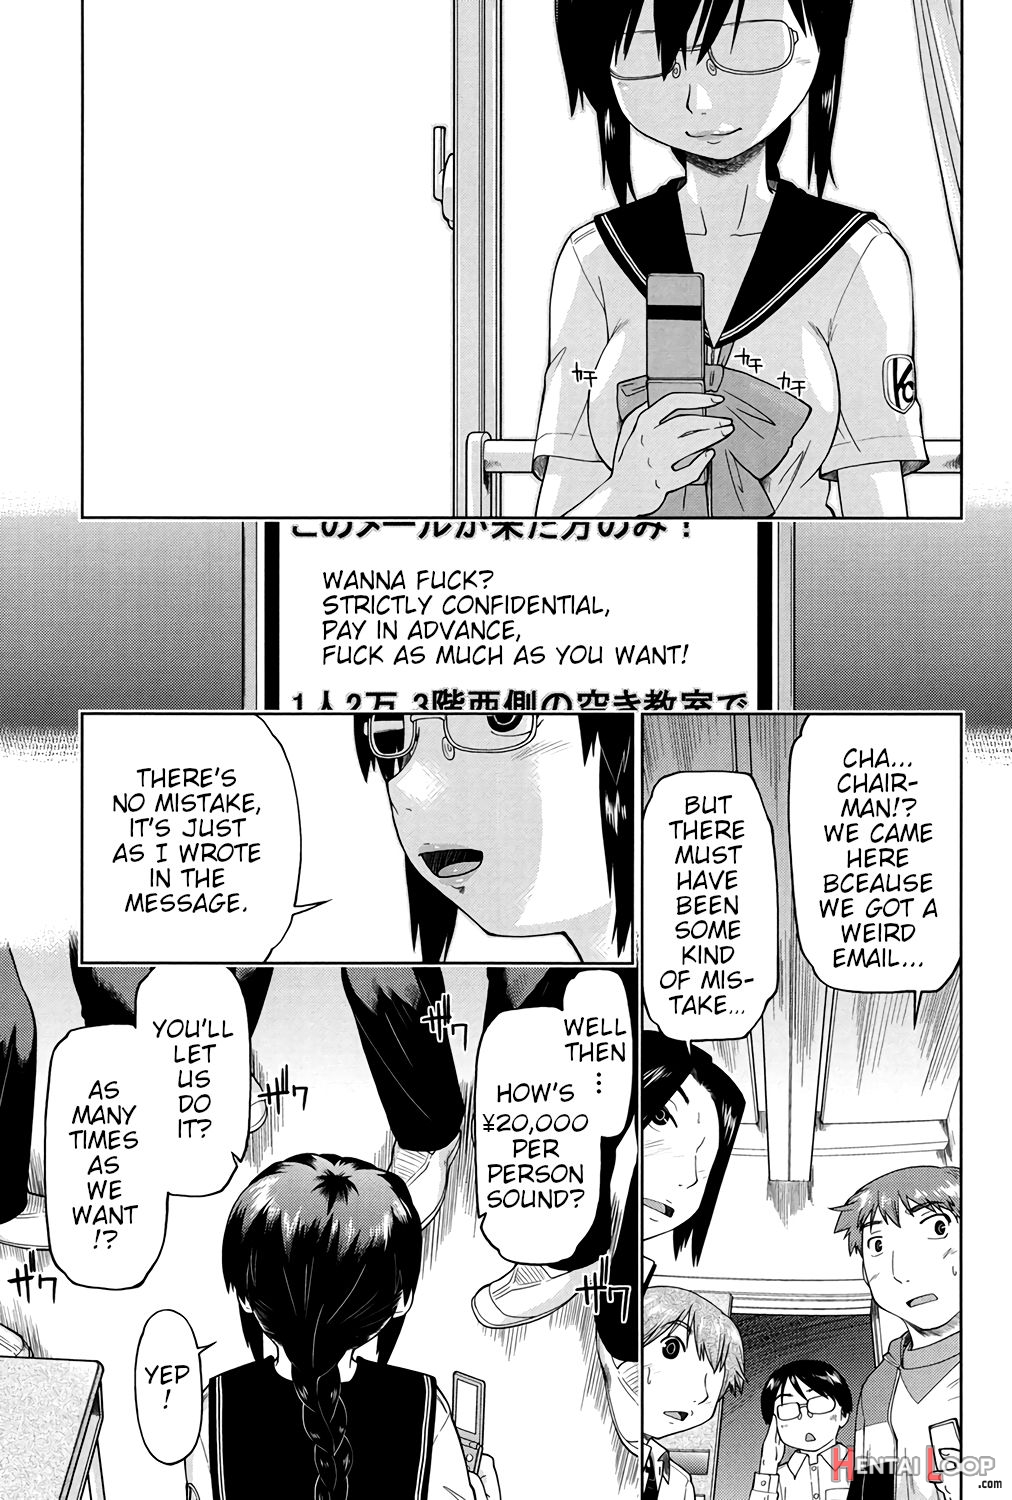 After School Together With Glasses Girl Chairman page 1